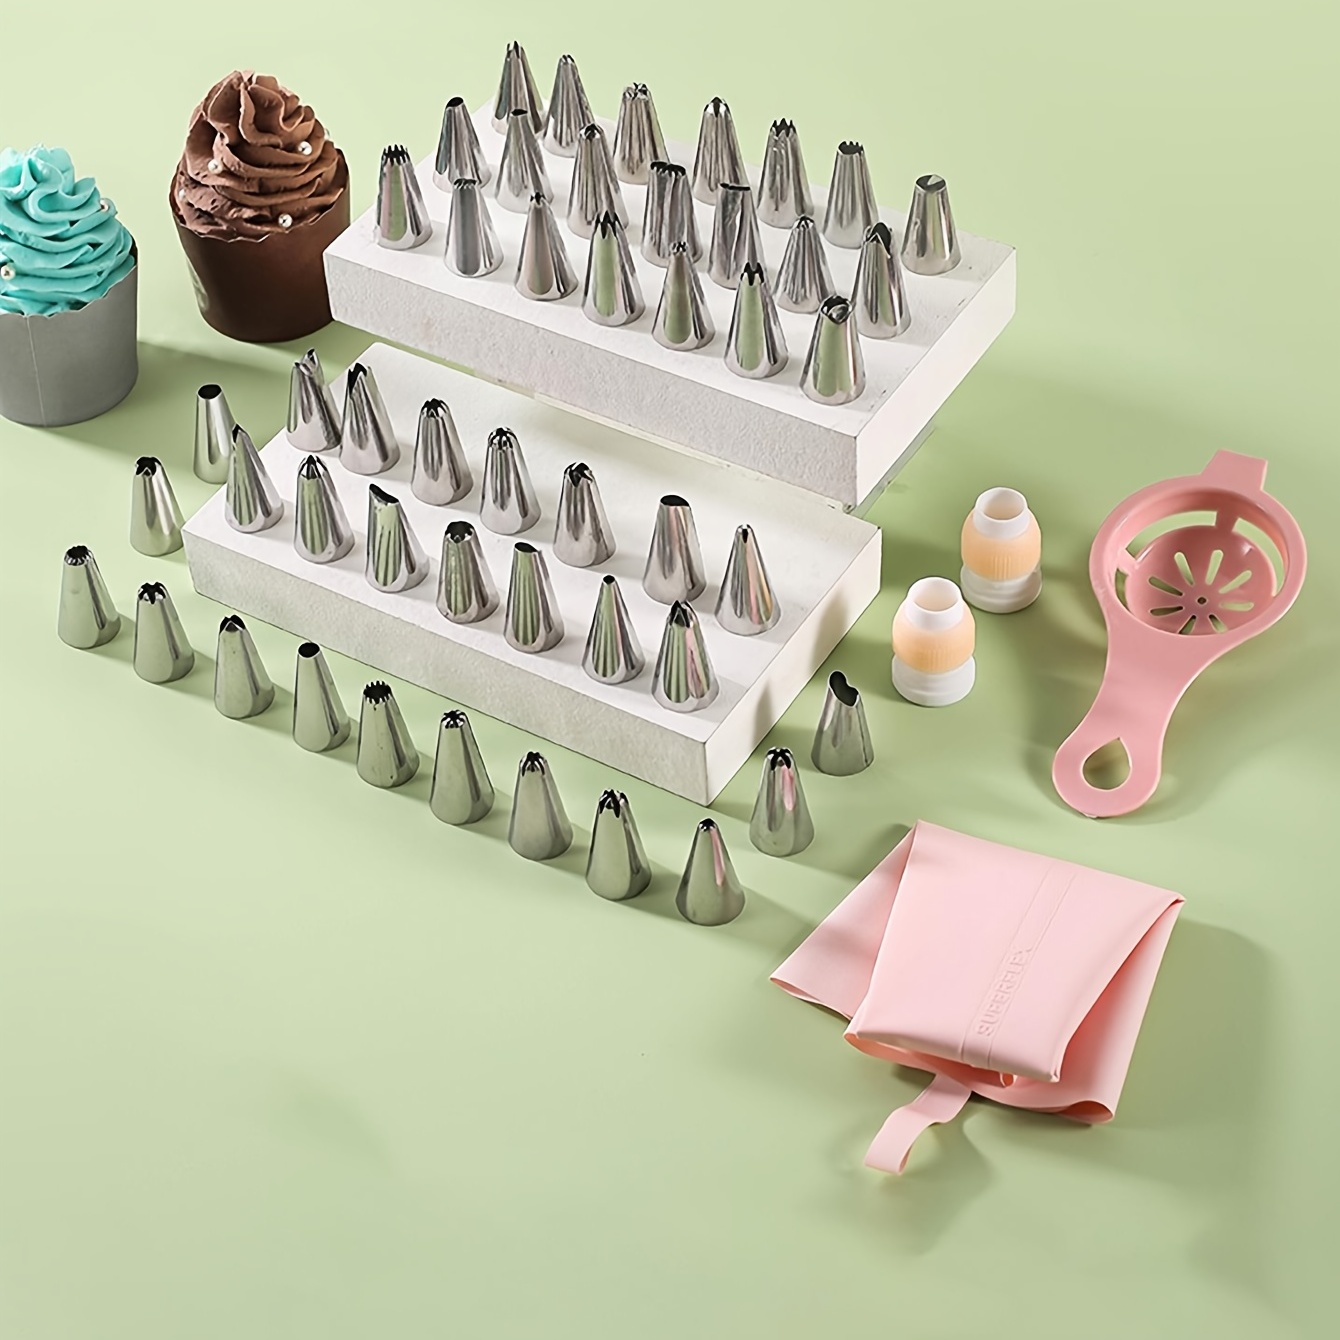 NZL ICING NOZZLE SET OF 8 WITH FLOWER NAIL LIFTER Stainless Steel Quick  Flower Icing Nozzle Price in India - Buy NZL ICING NOZZLE SET OF 8 WITH  FLOWER NAIL LIFTER Stainless